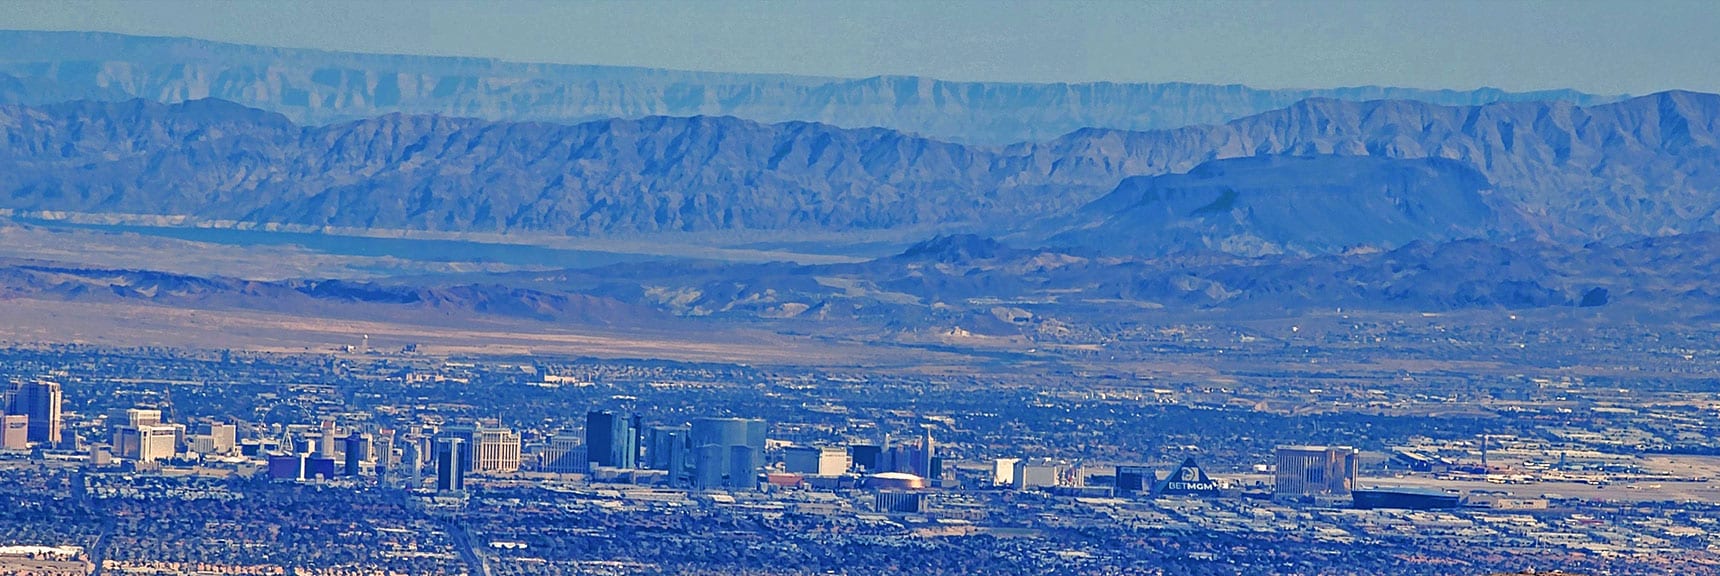 South Vegas Strip. Note Lake Mead Background and Fortification Hill Mesa (Upper Right) | Mid Upper Crest Ridgeline | Rainbow Mountain Wilderness, Nevada